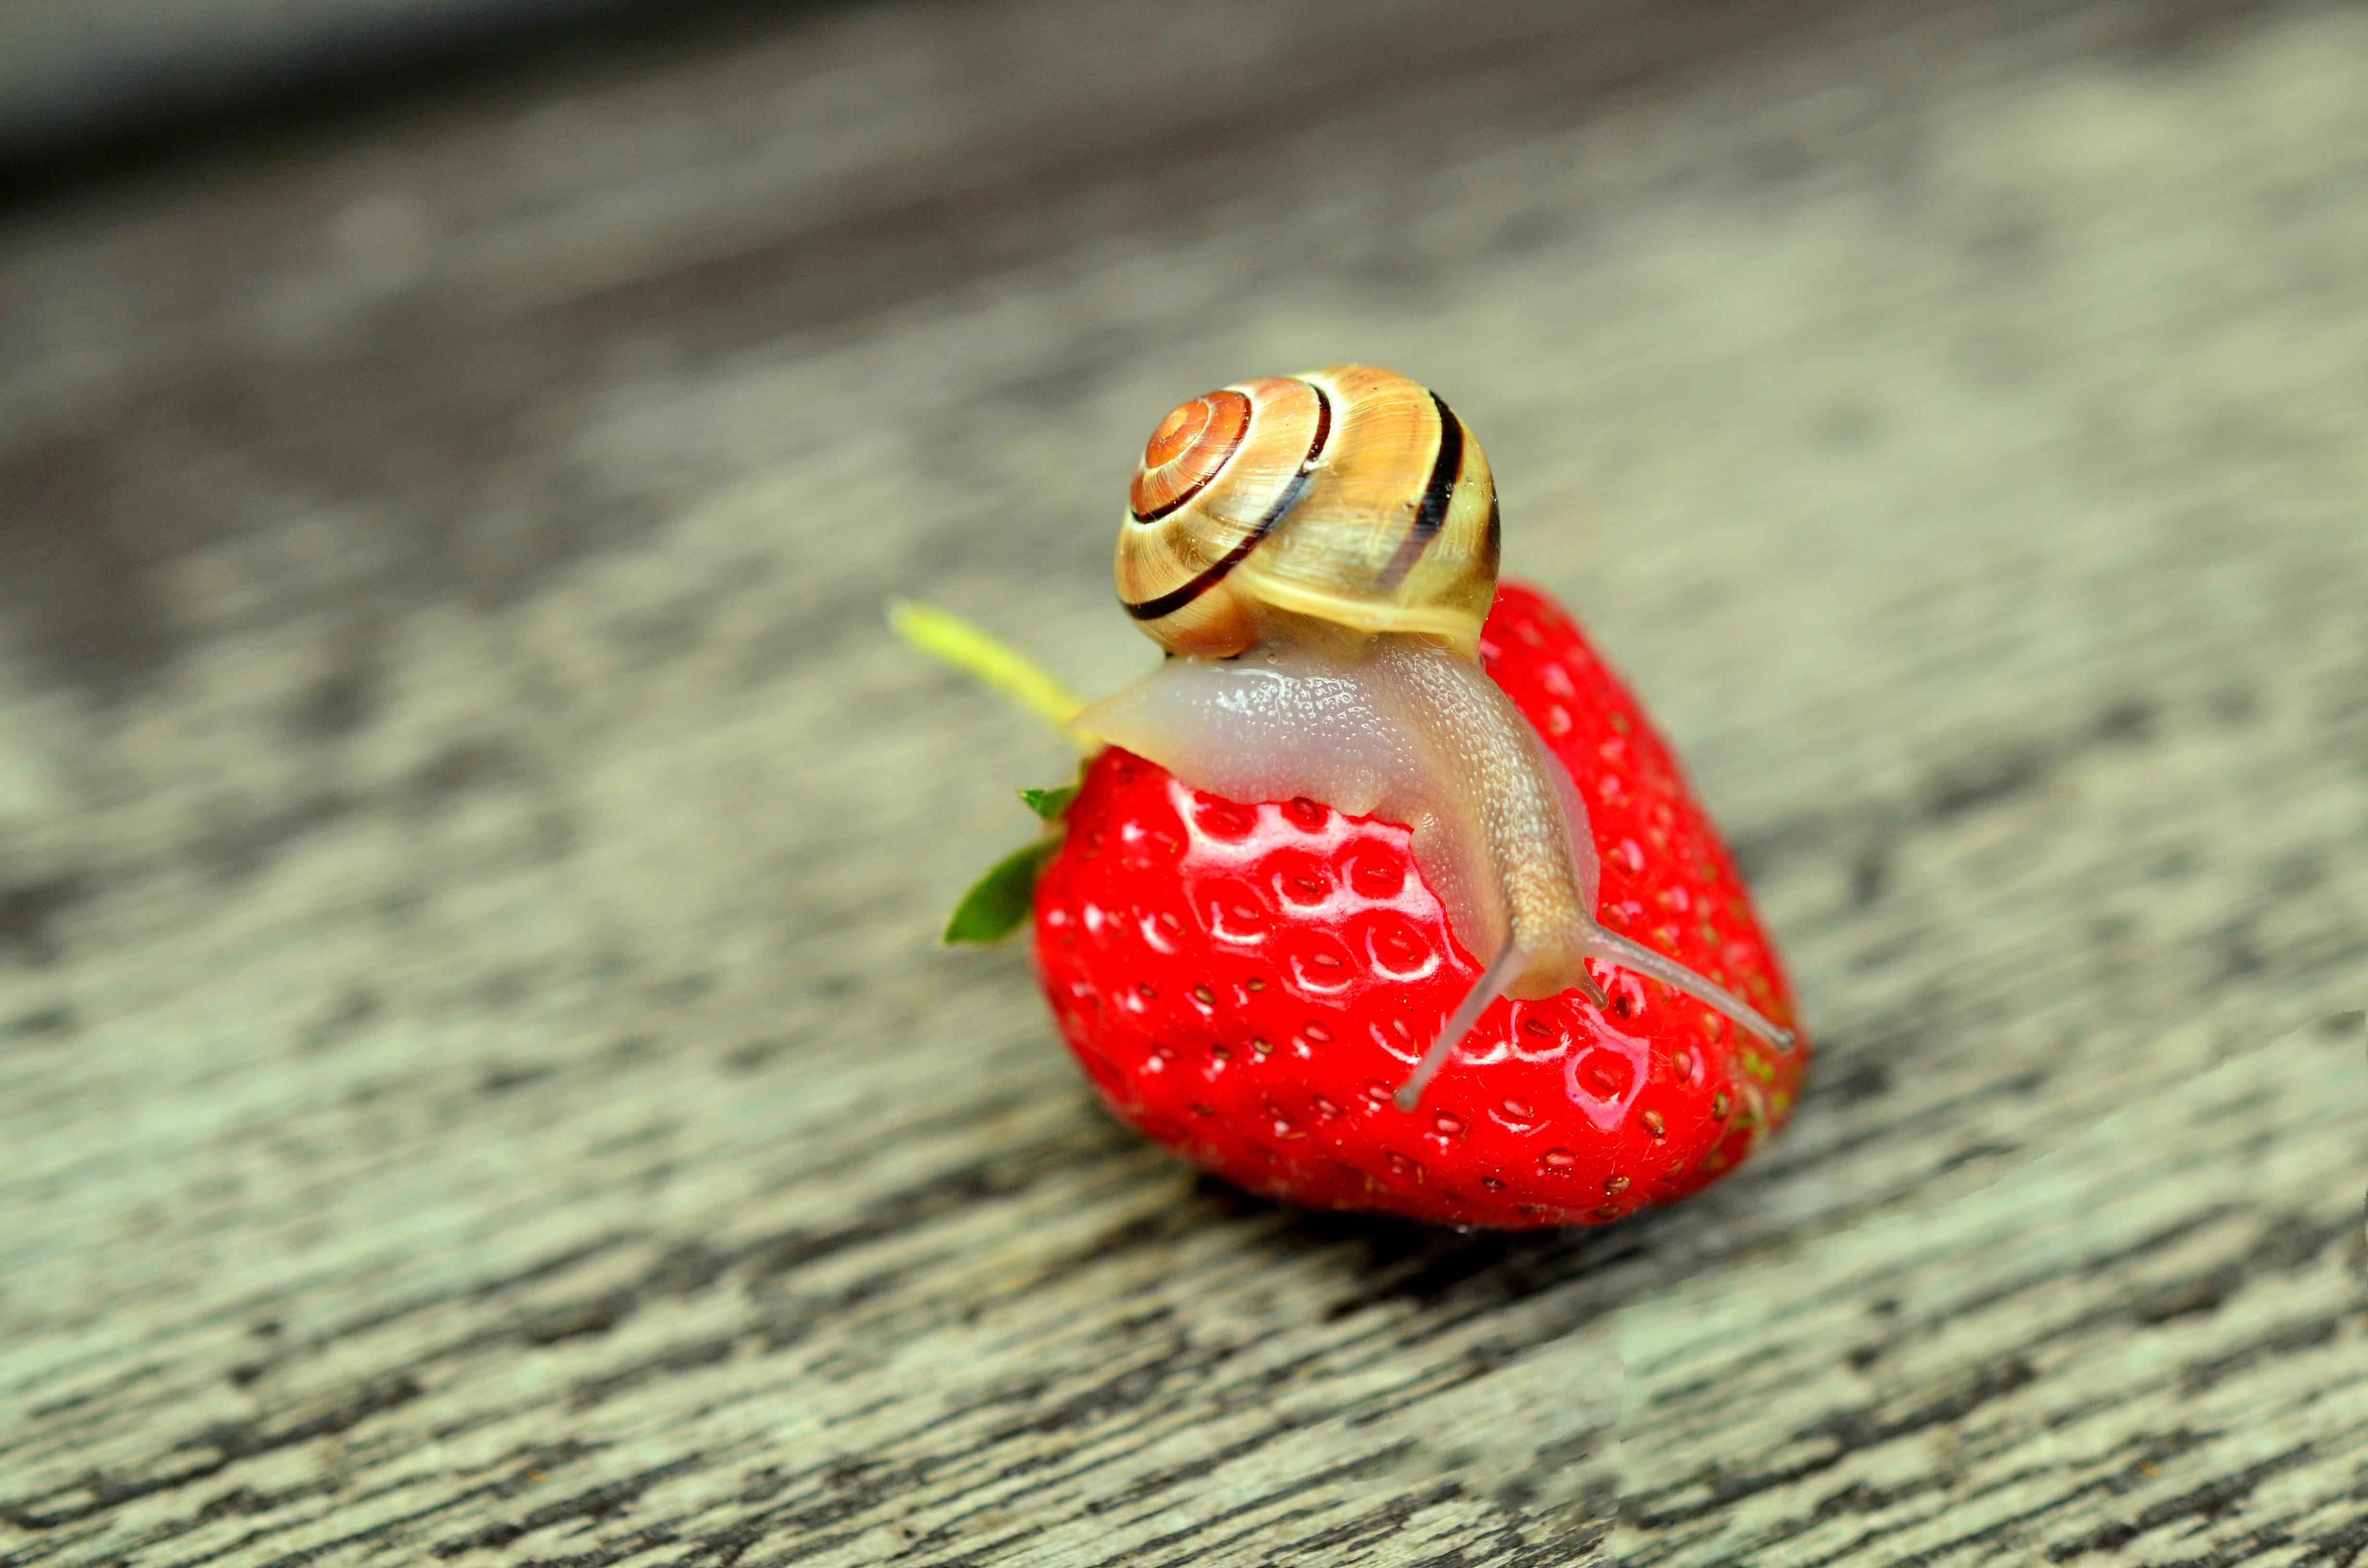 snail on top of strawberry o